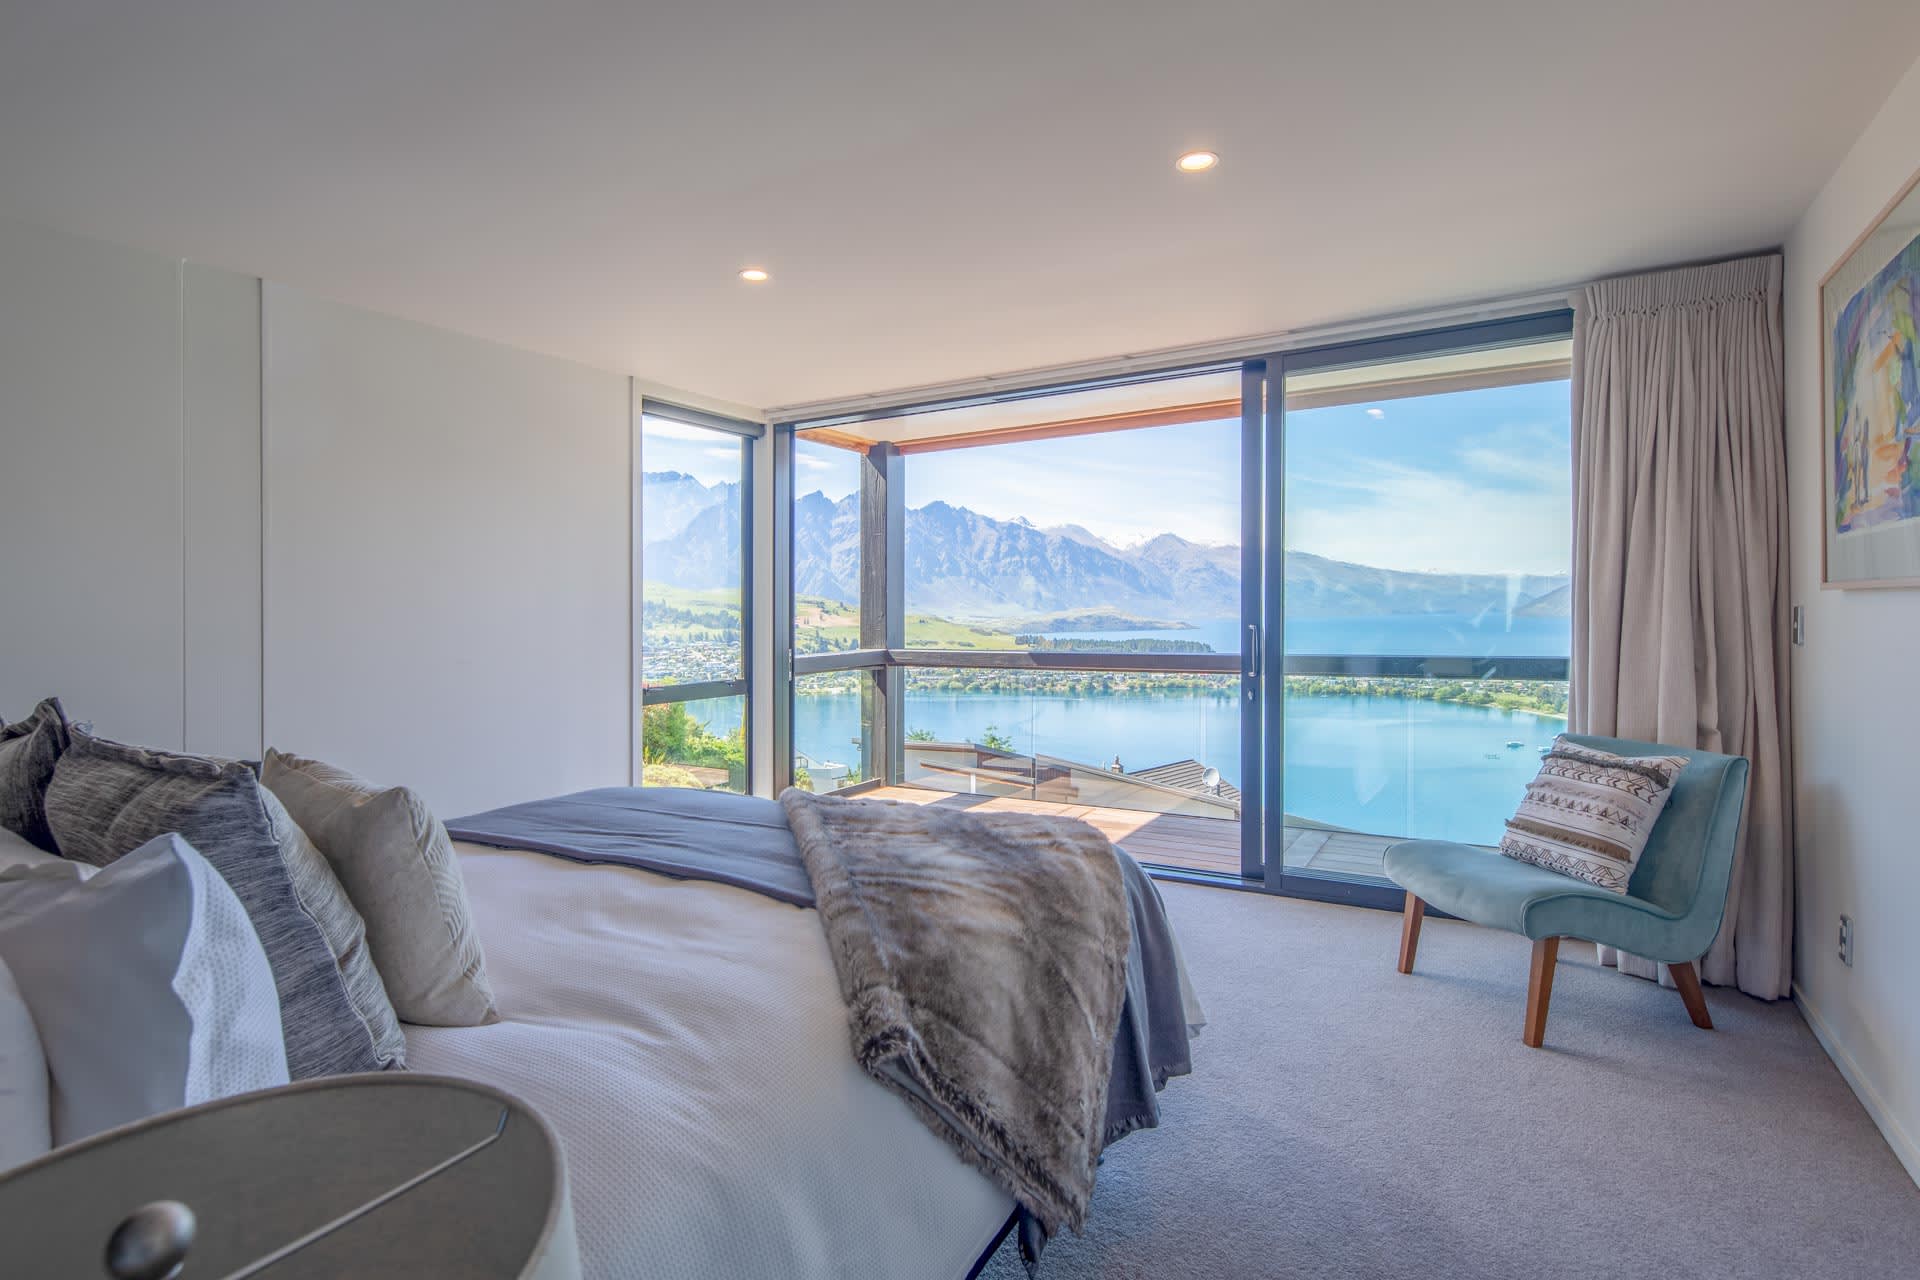 Bedroom 2 with stunning mountain views